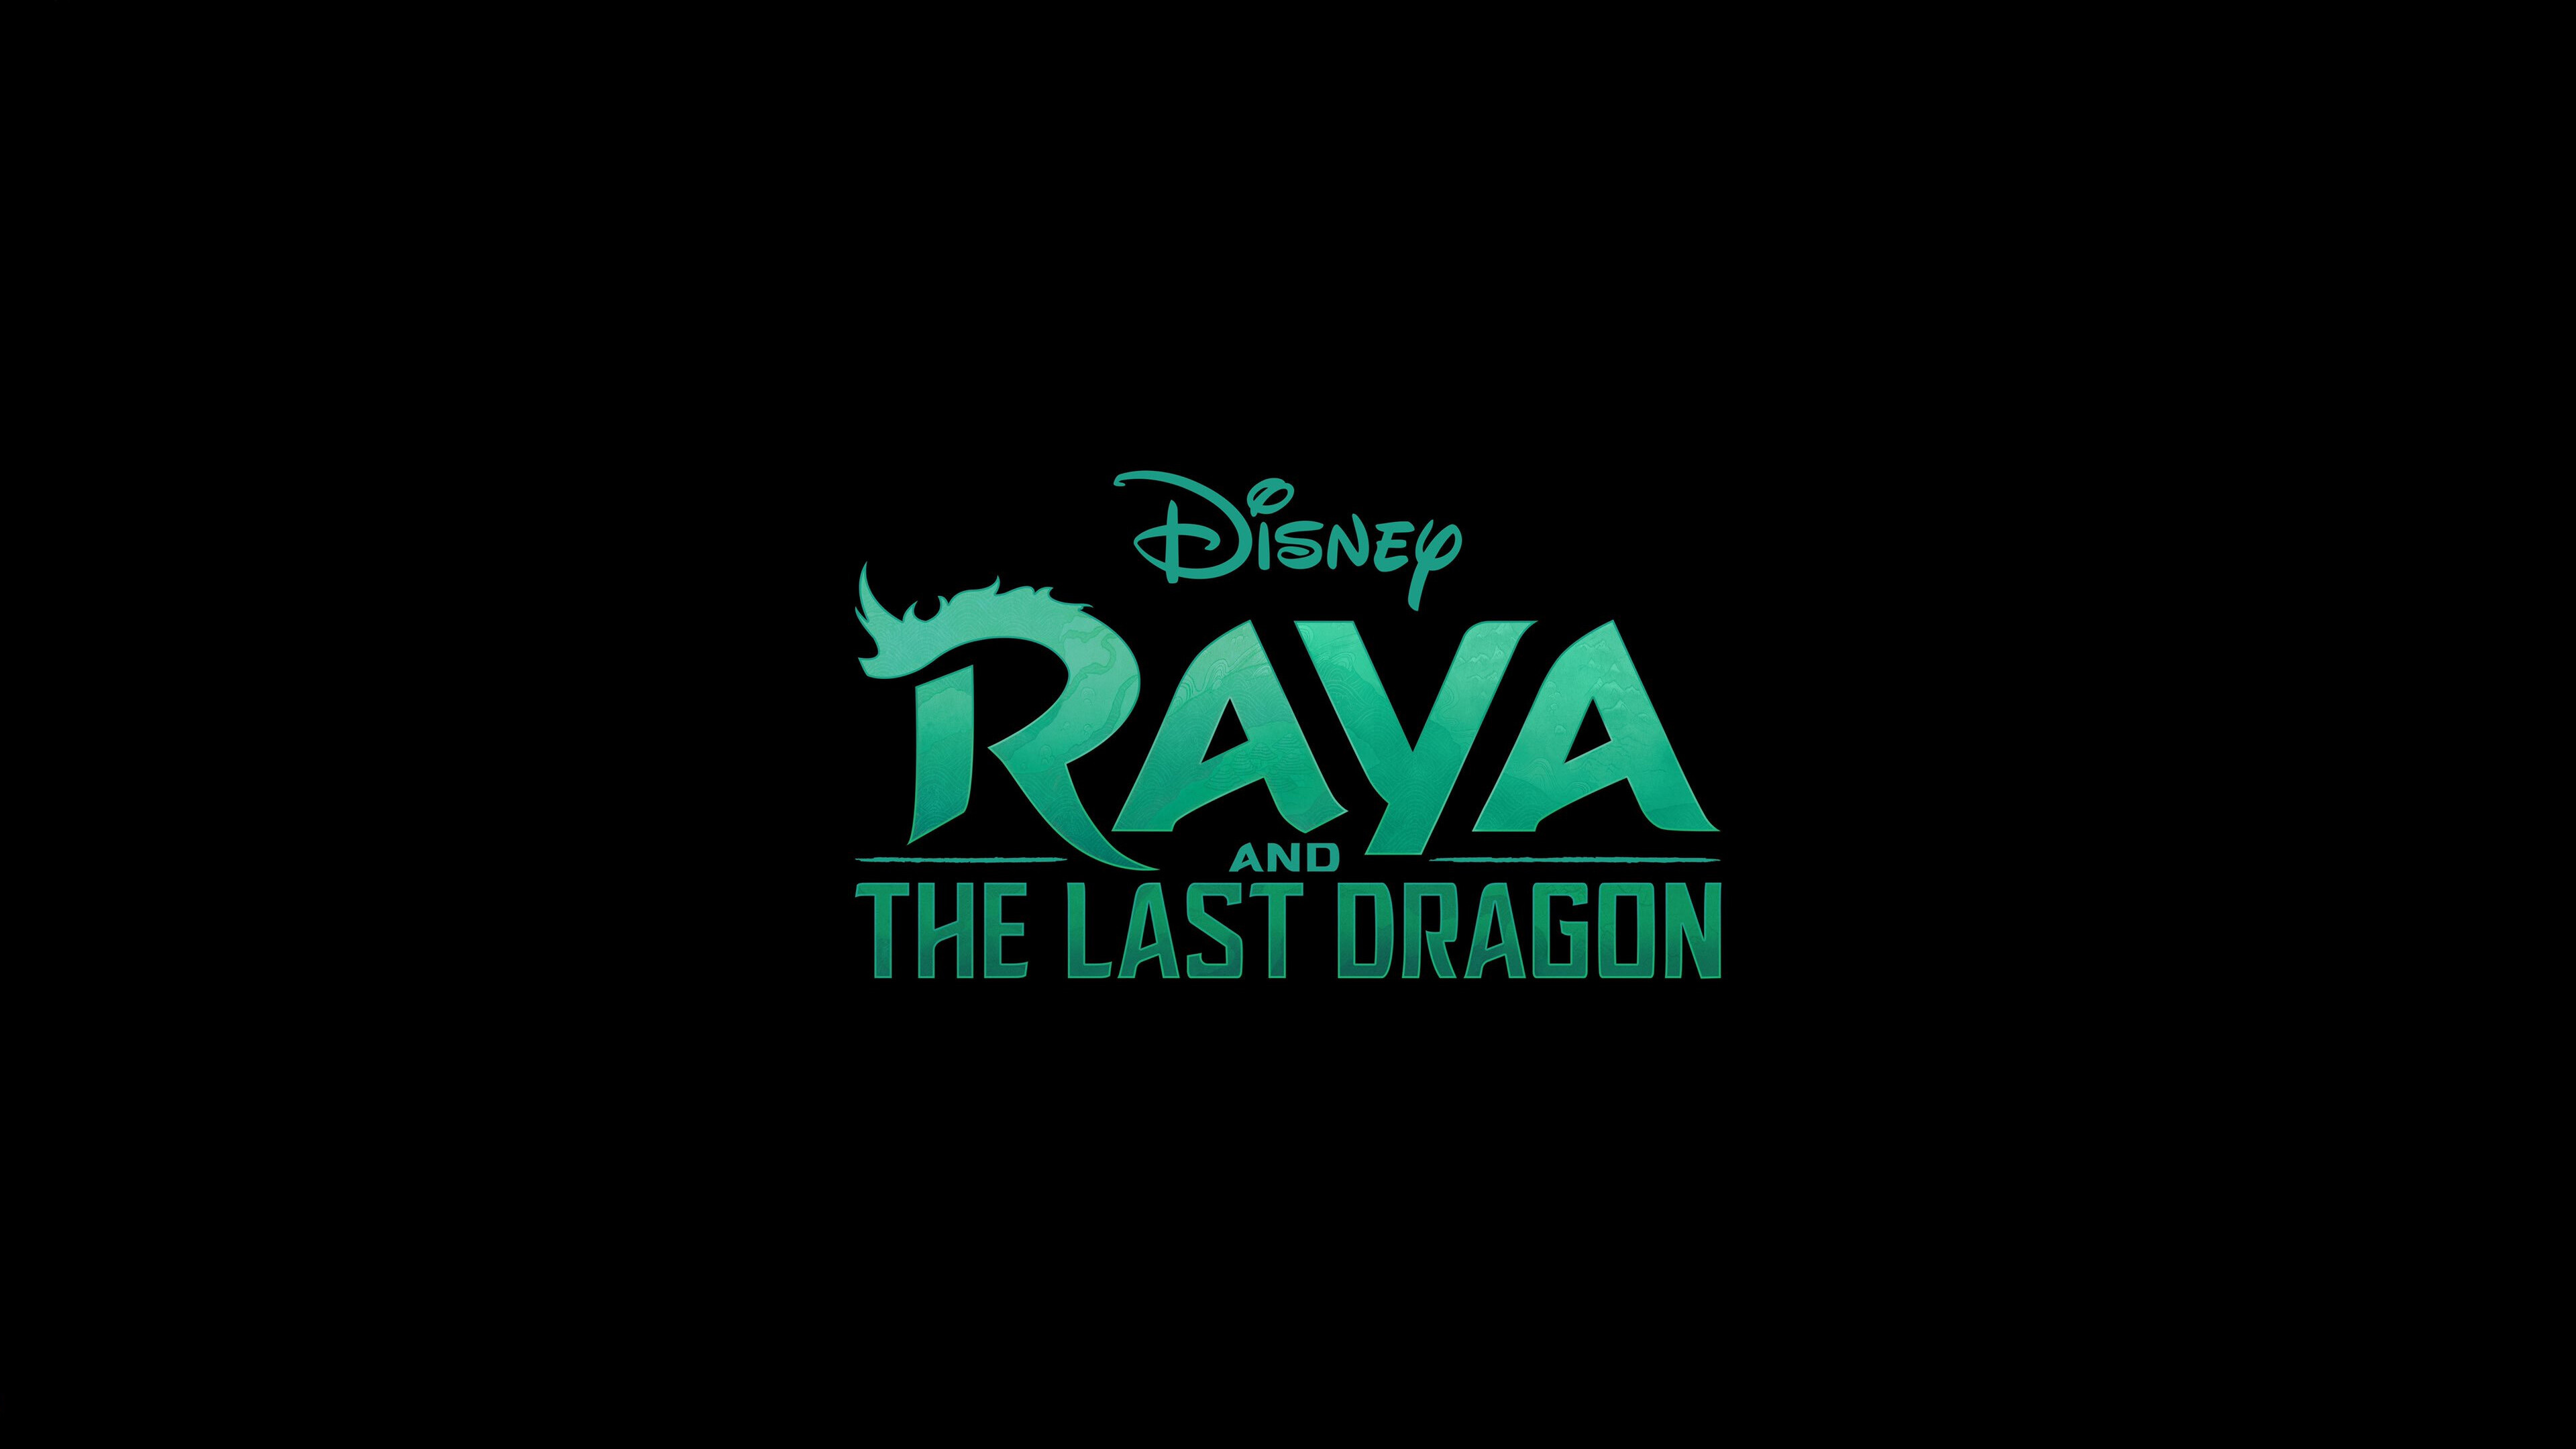 Raya and the Last Dragon: The 59th film produced by the Walt Disney Animation Studios. 3840x2160 4K Wallpaper.